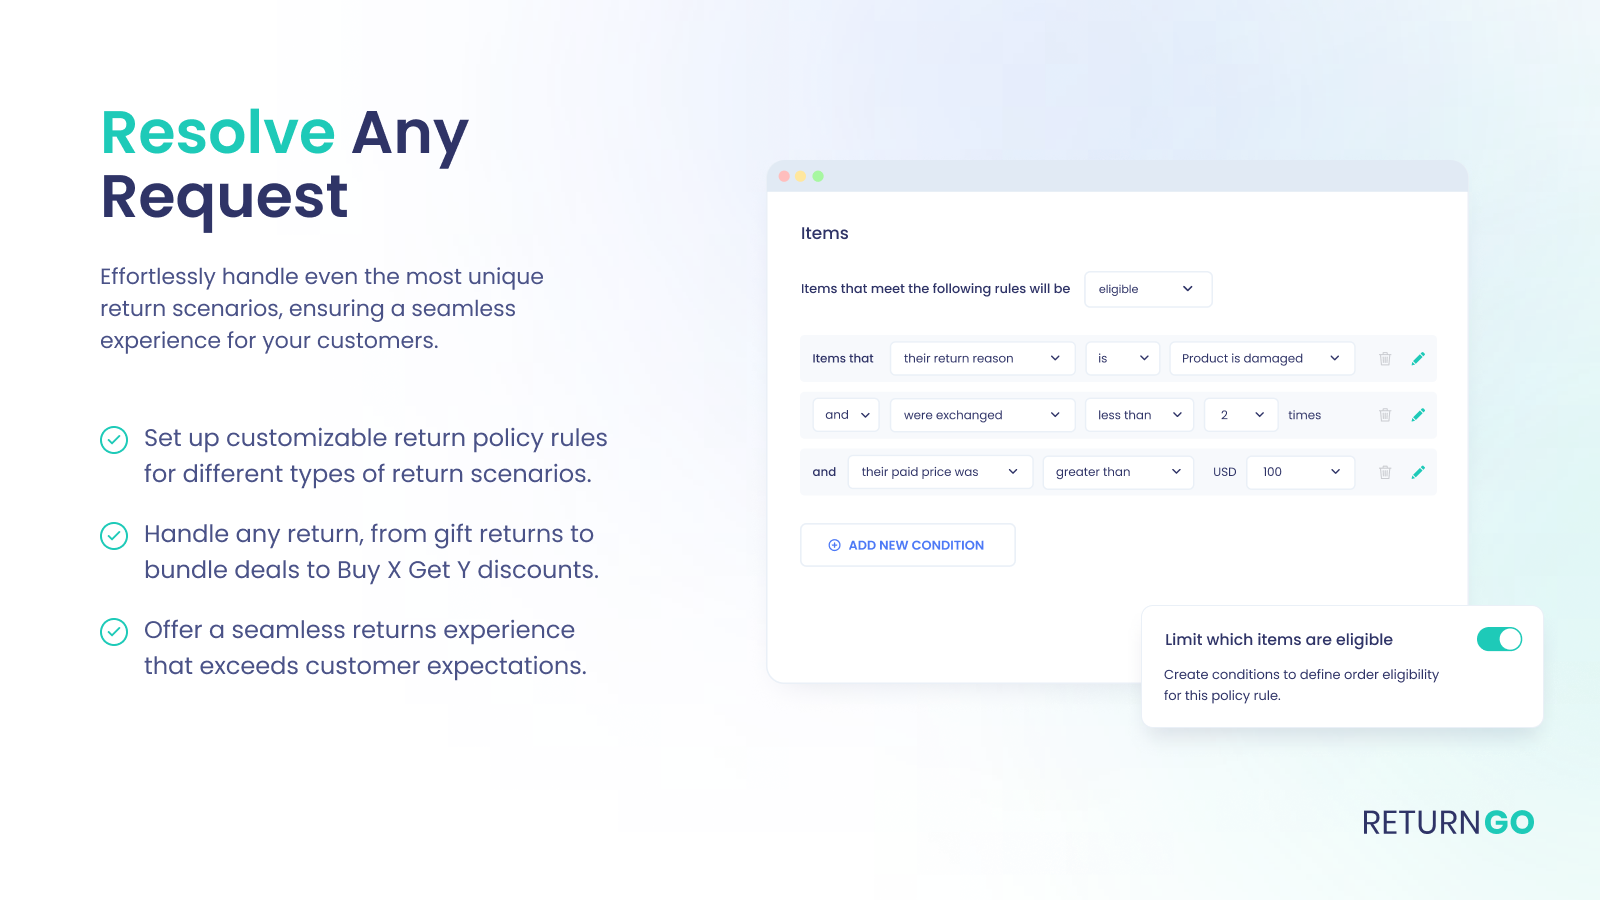 Customize return policy rules to handle any return